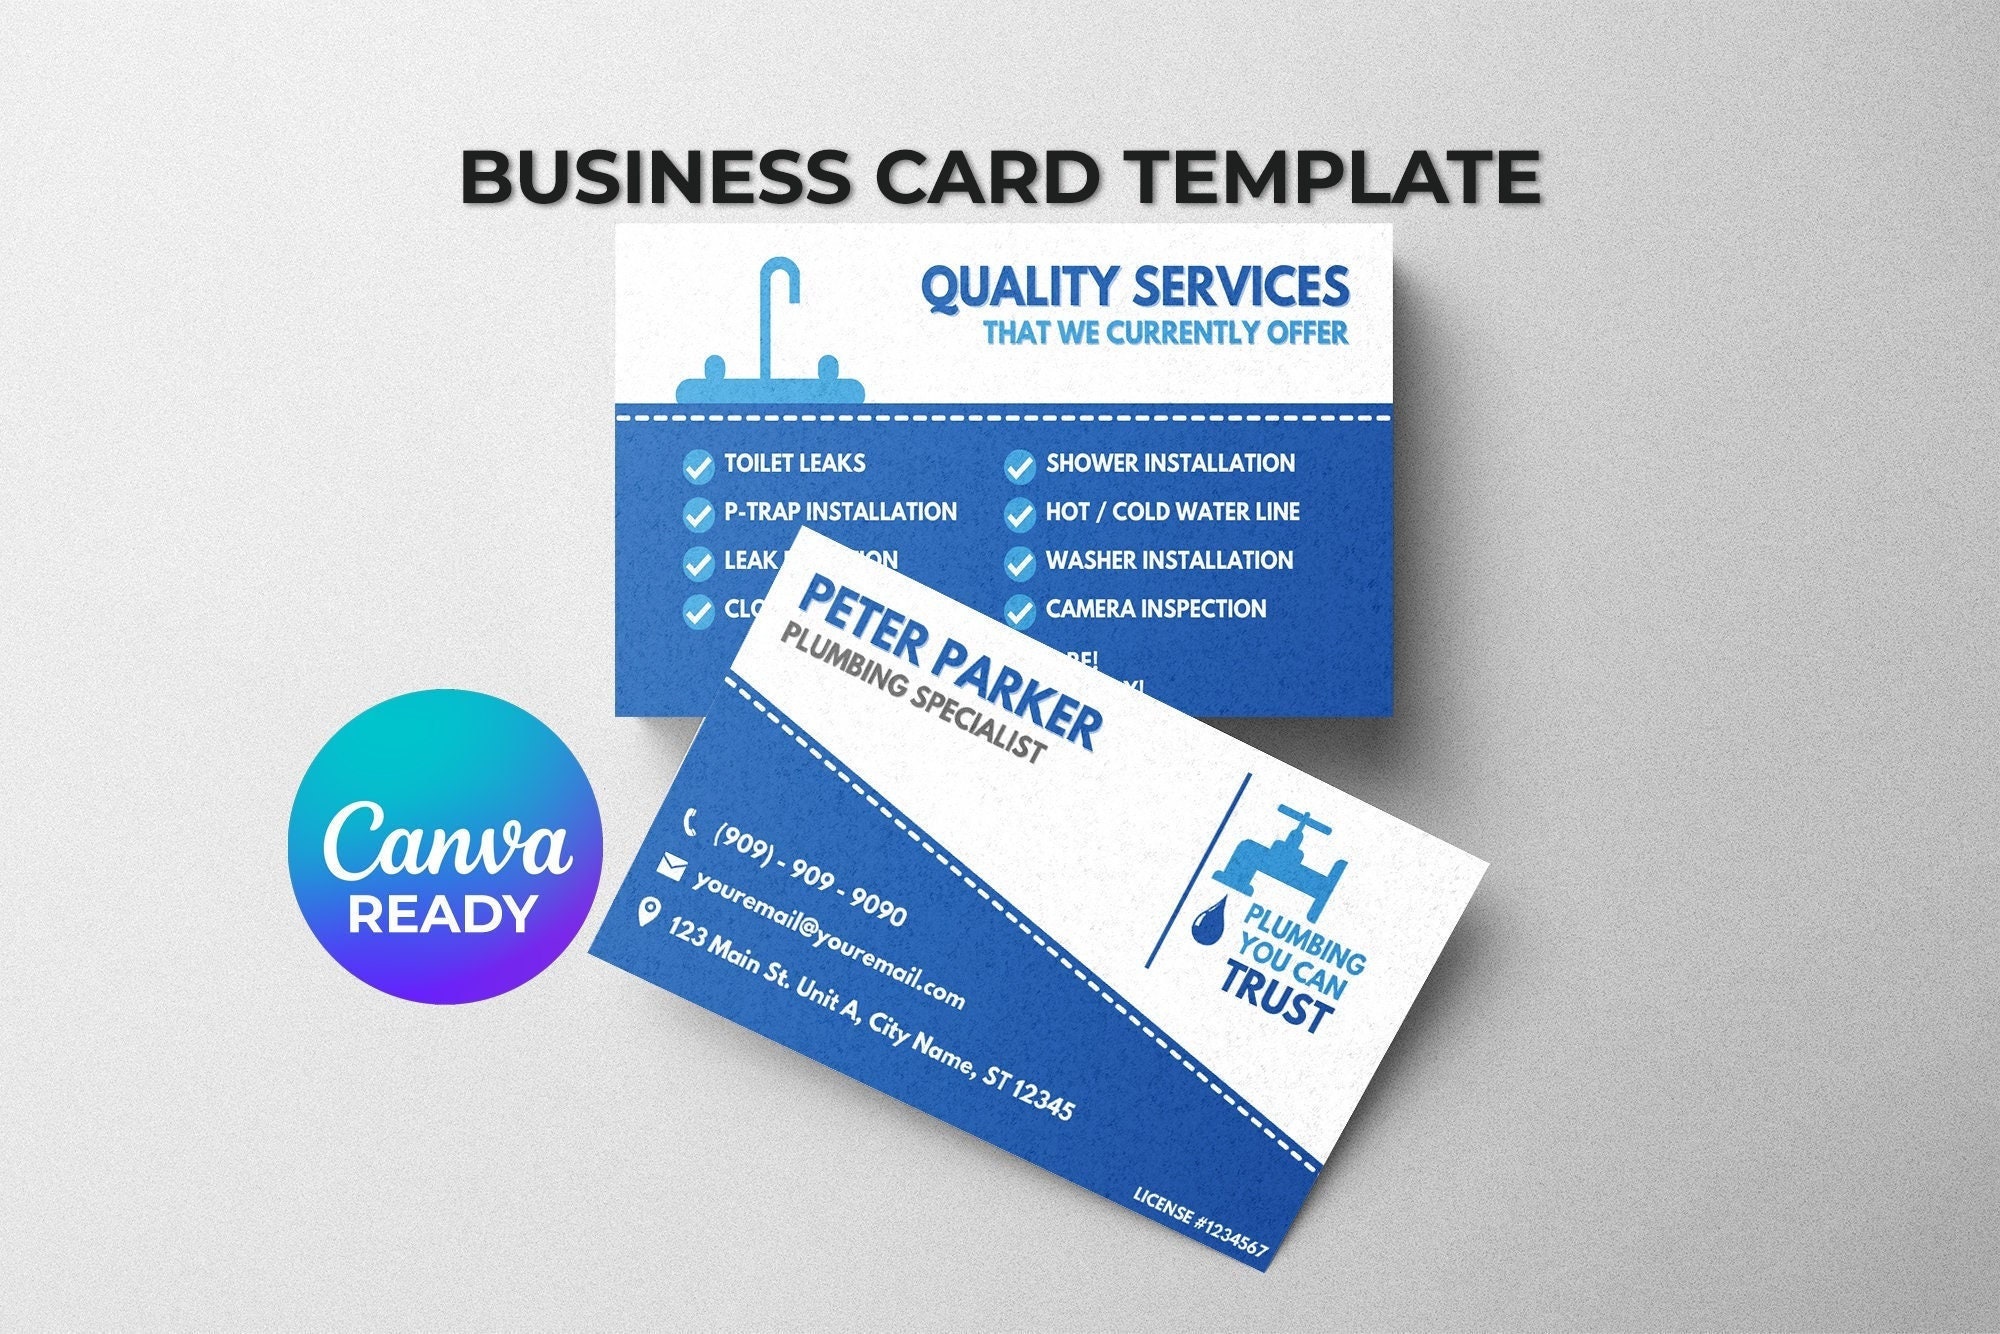 Plumbing Business Cards: How to Create an Effective Design - BusinessCards